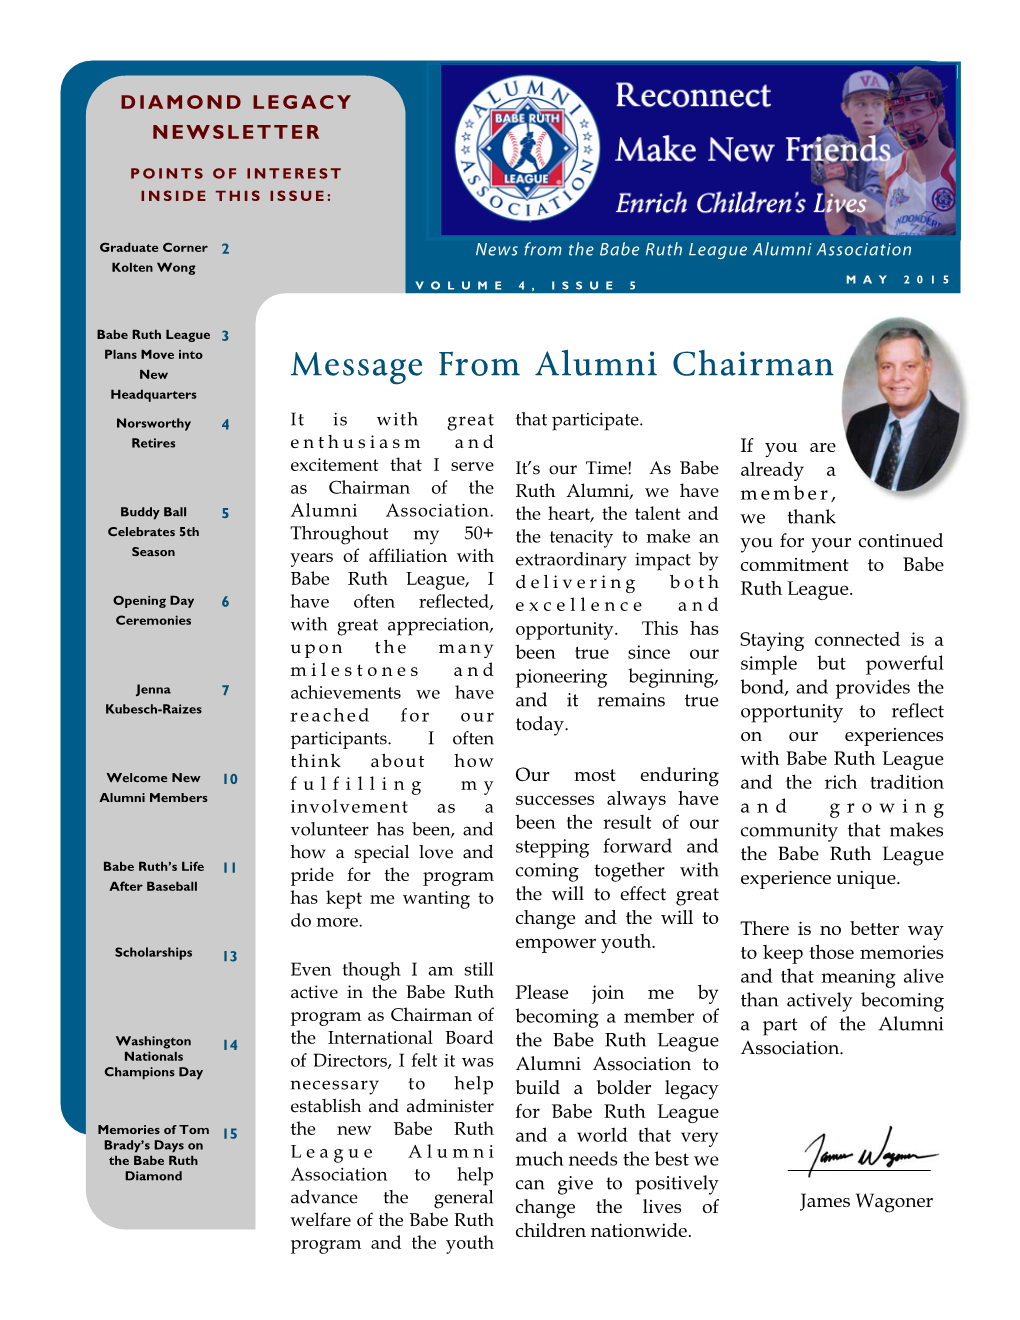 Message from Alumni Chairman Headquarters